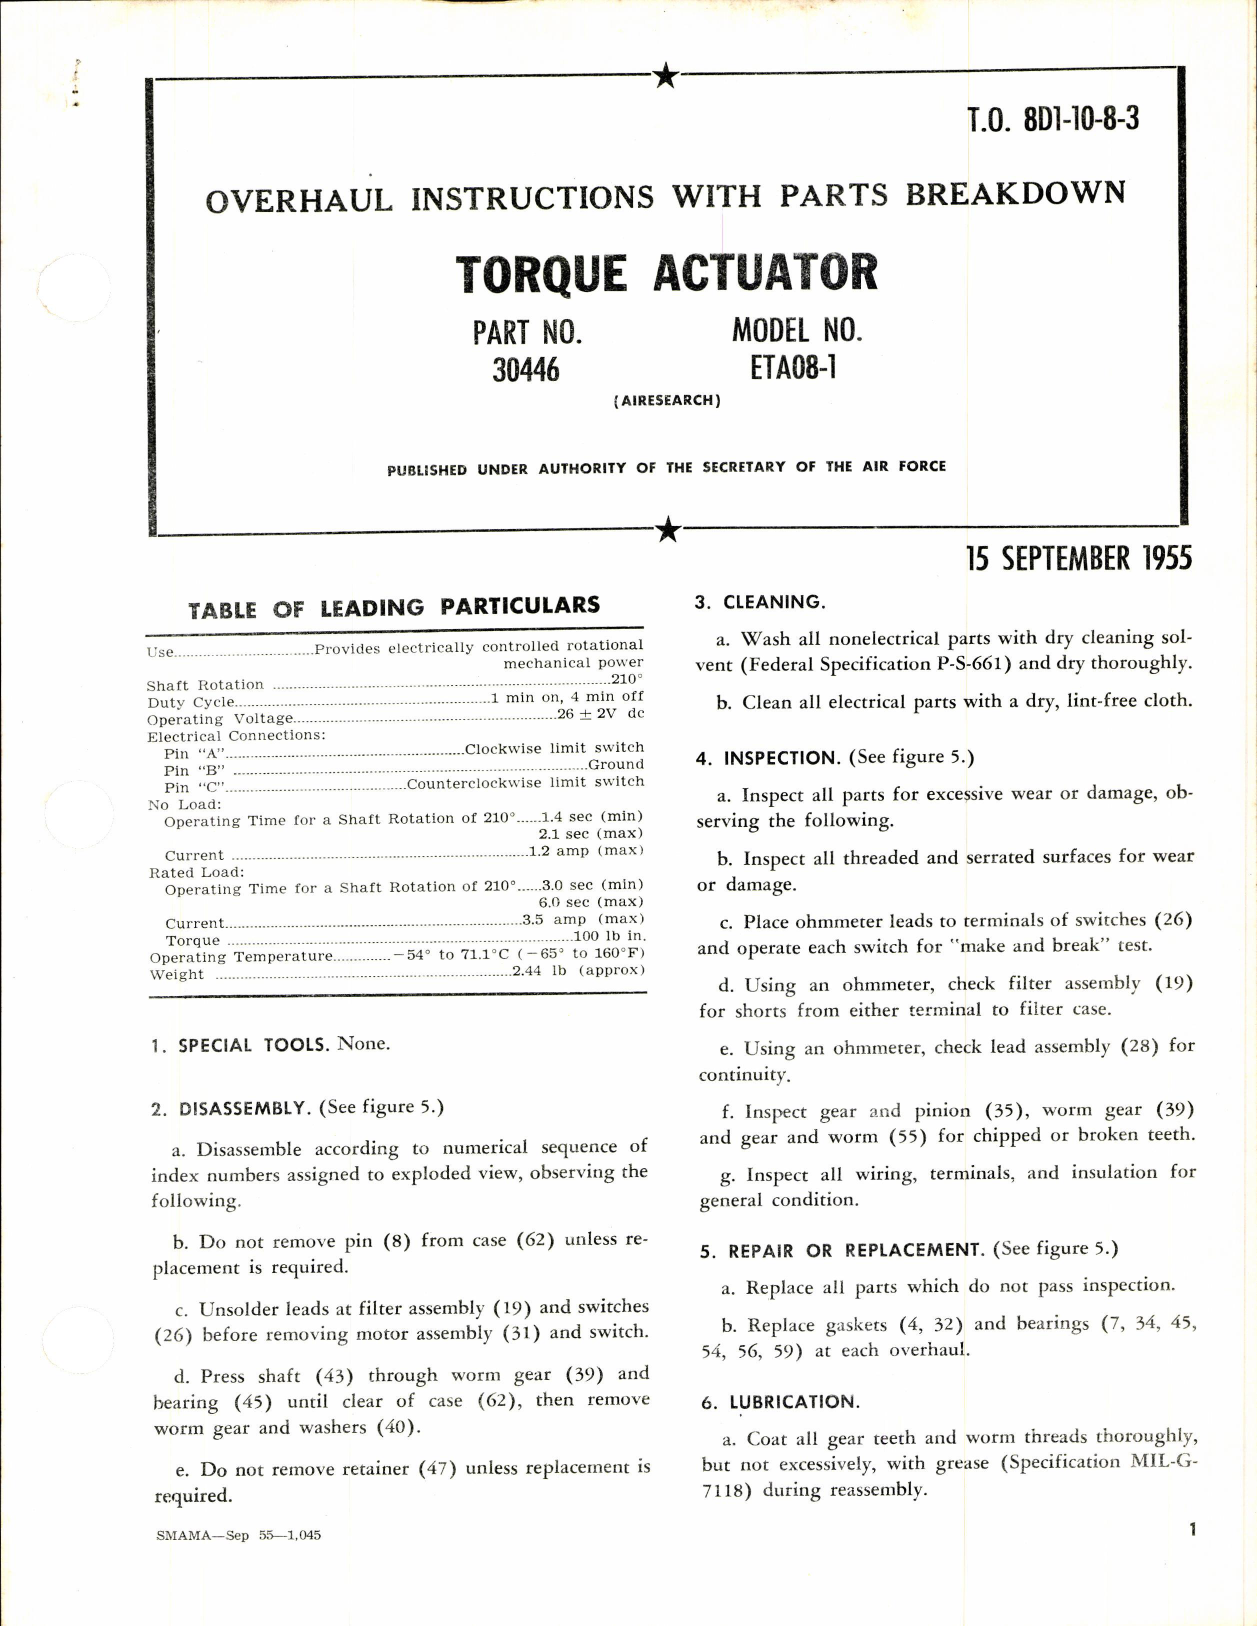 Sample page 1 from AirCorps Library document: Overhaul Instructions with Parts Breakdown Torque Actuator